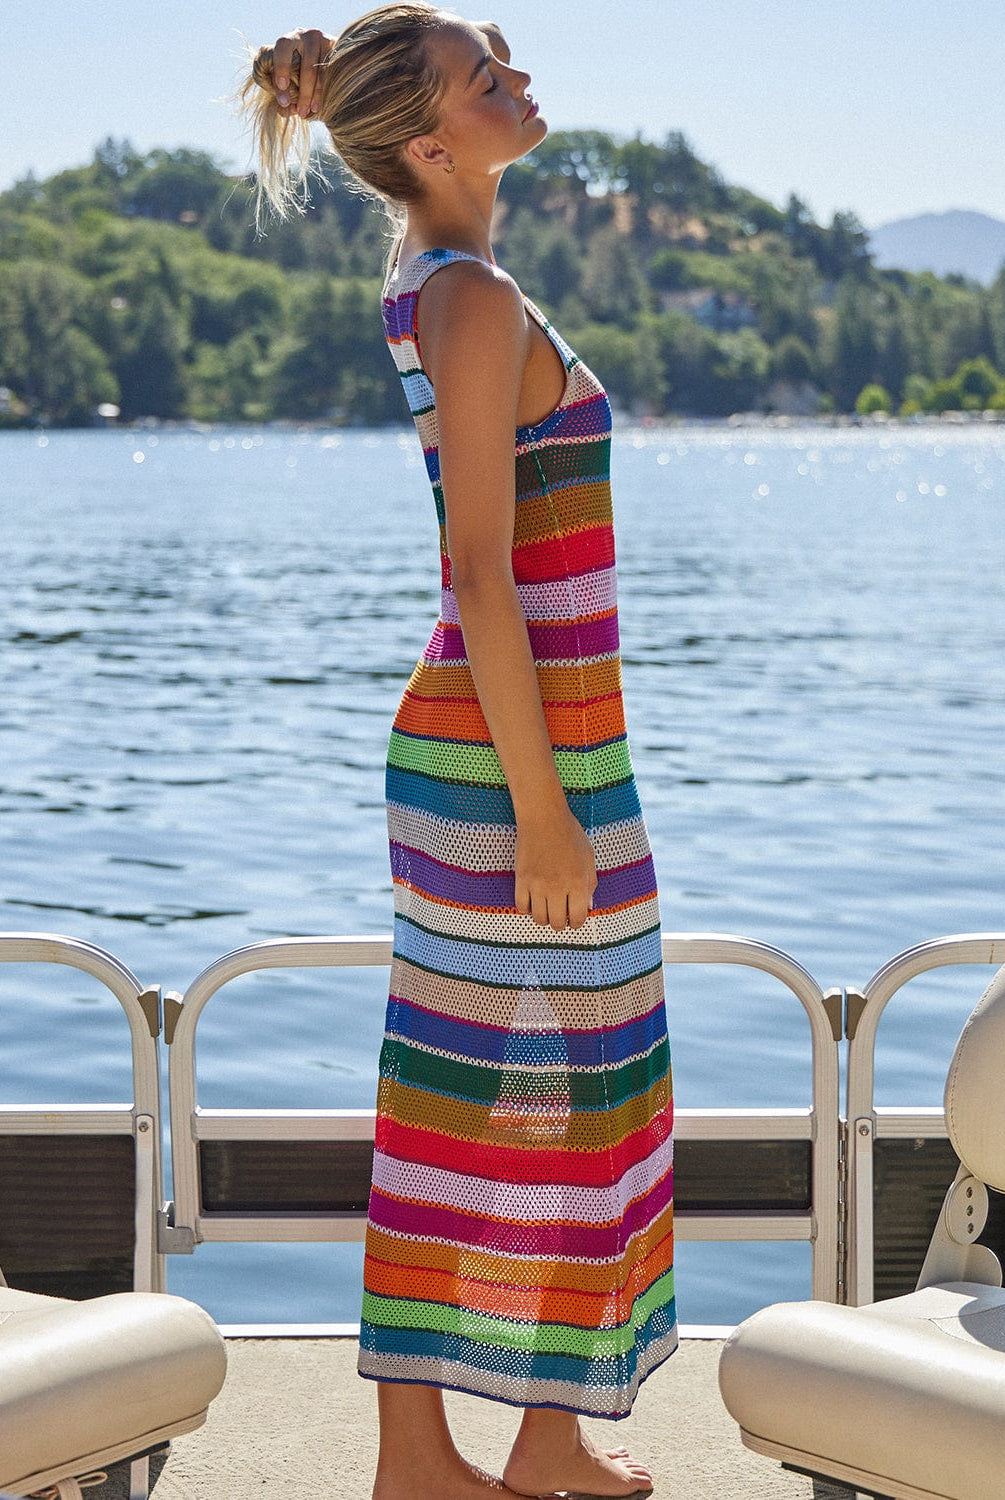 A blonde woman wearing a color block dress standing on a boat on a lake.